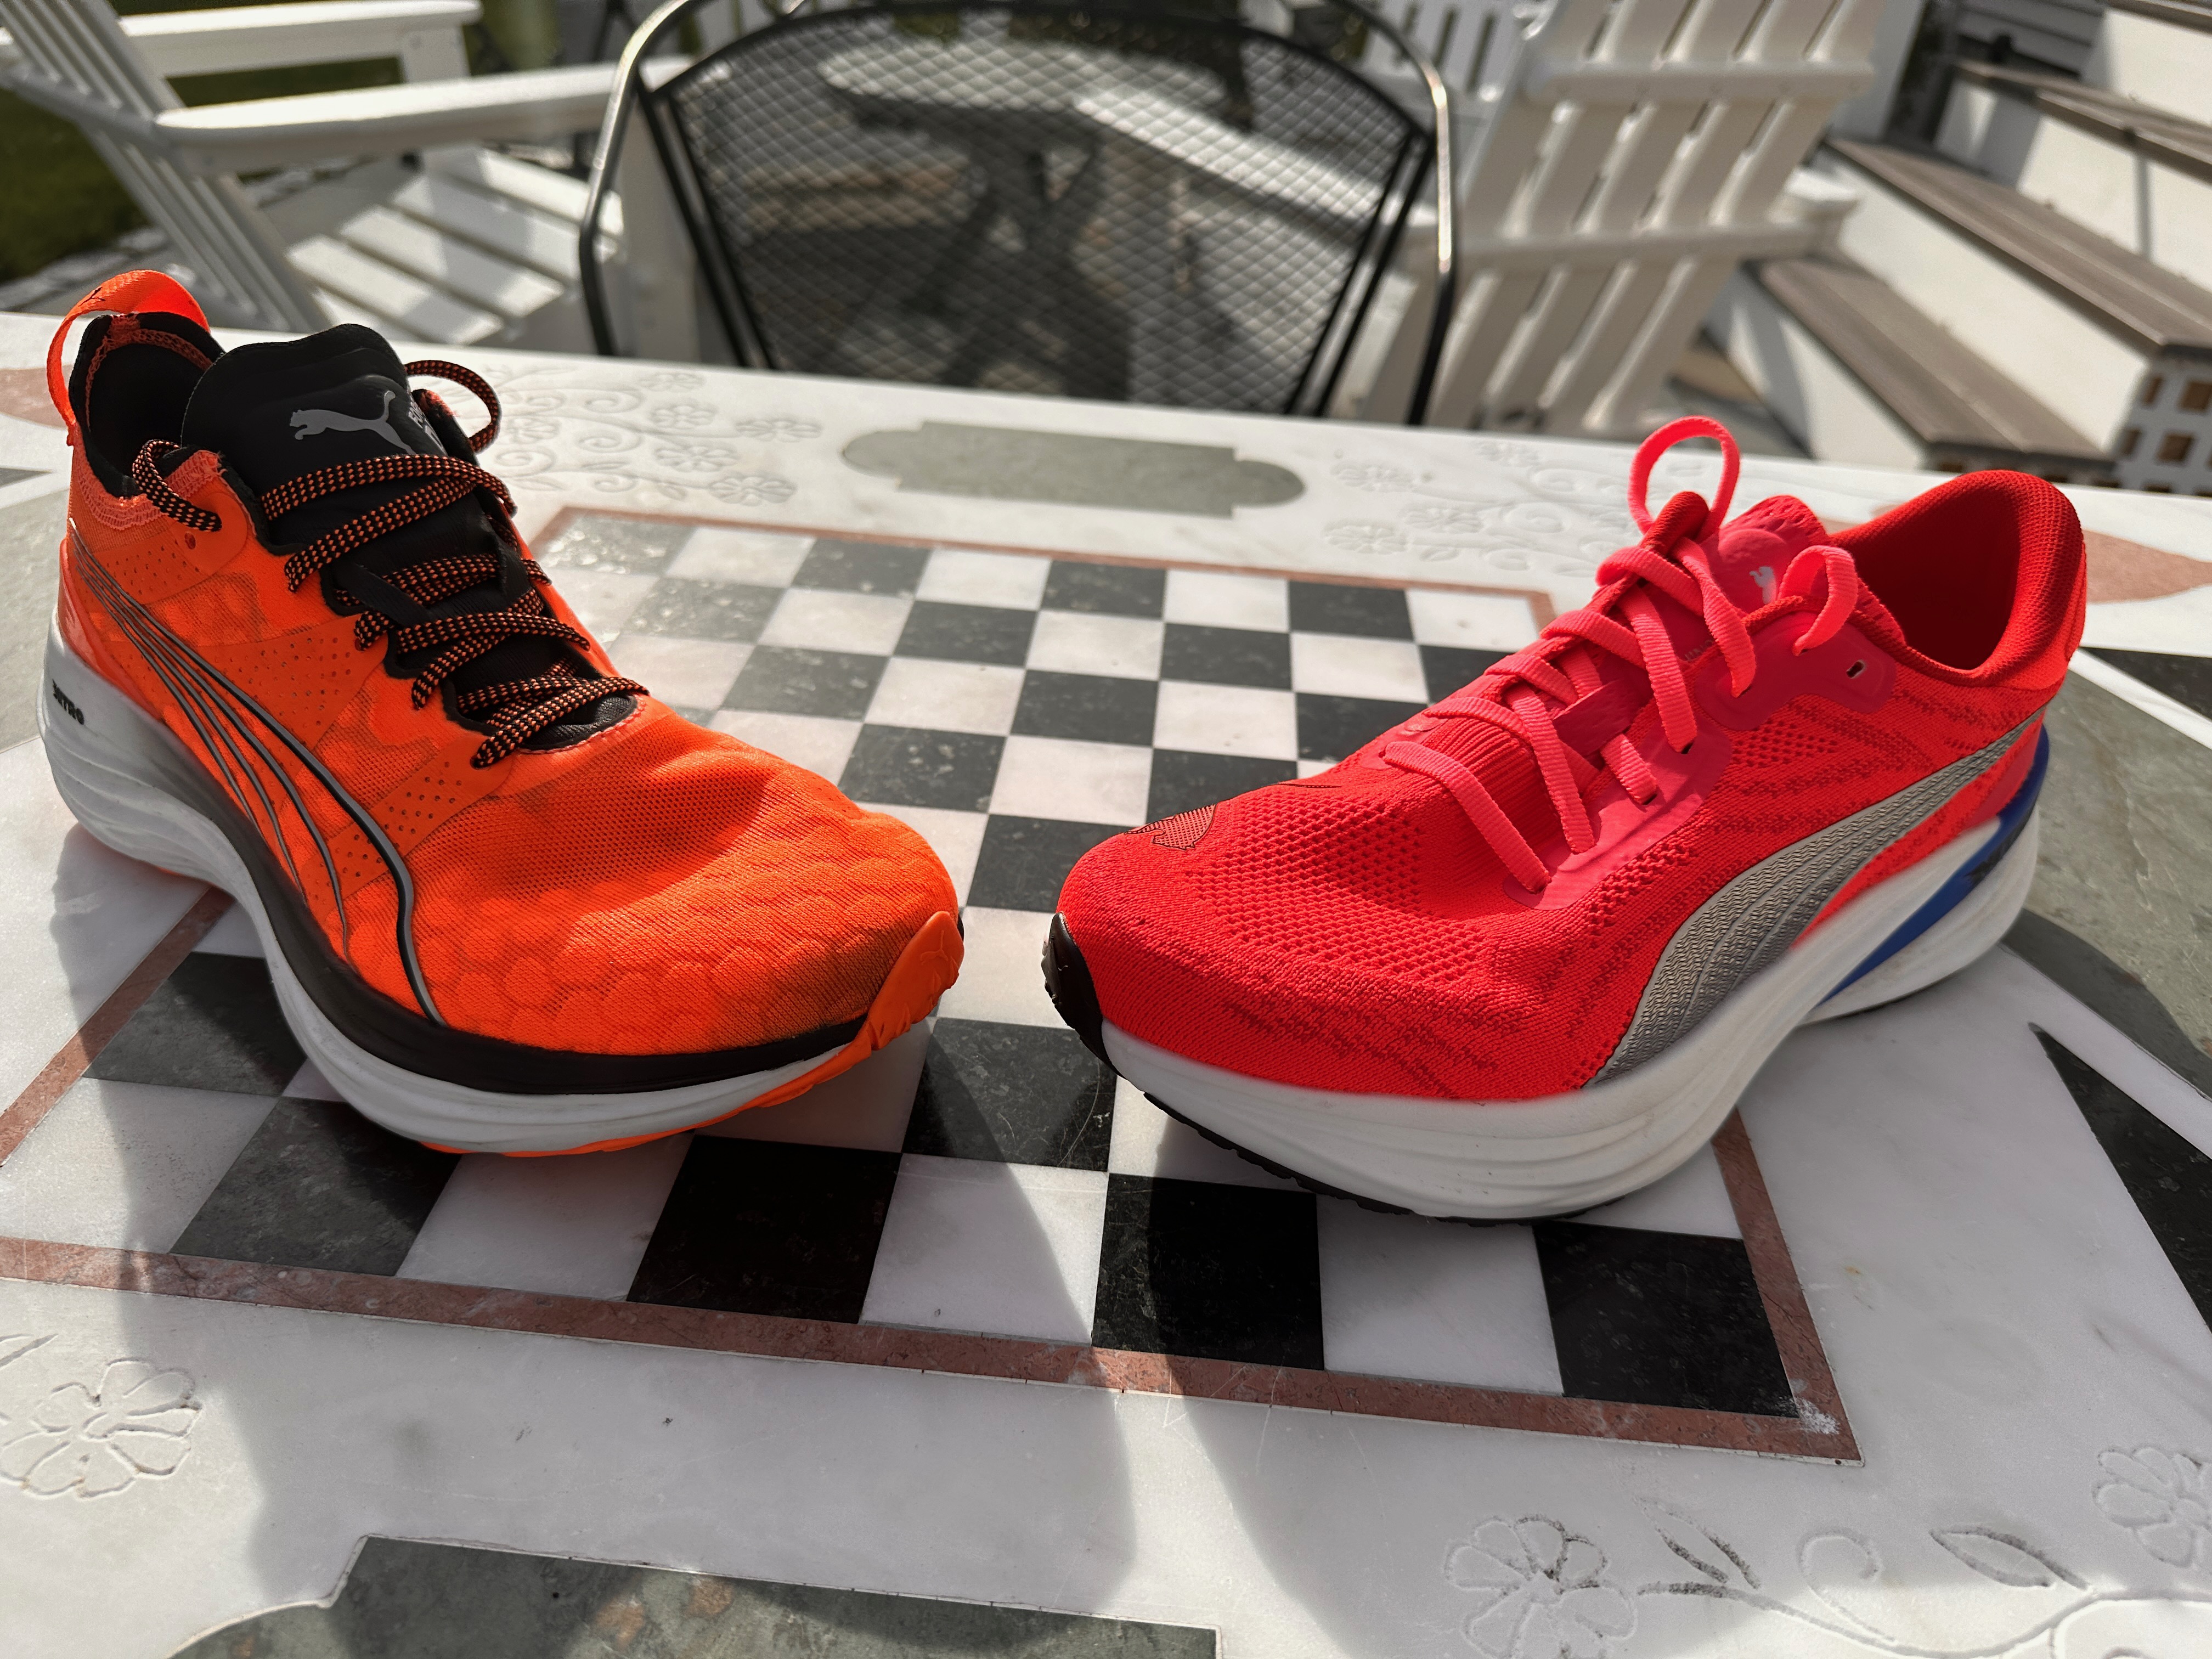 Puma Deviate Nitro 2 Review: These Sneakers Seriously Boosted My Confidence  as a Beginner Runner